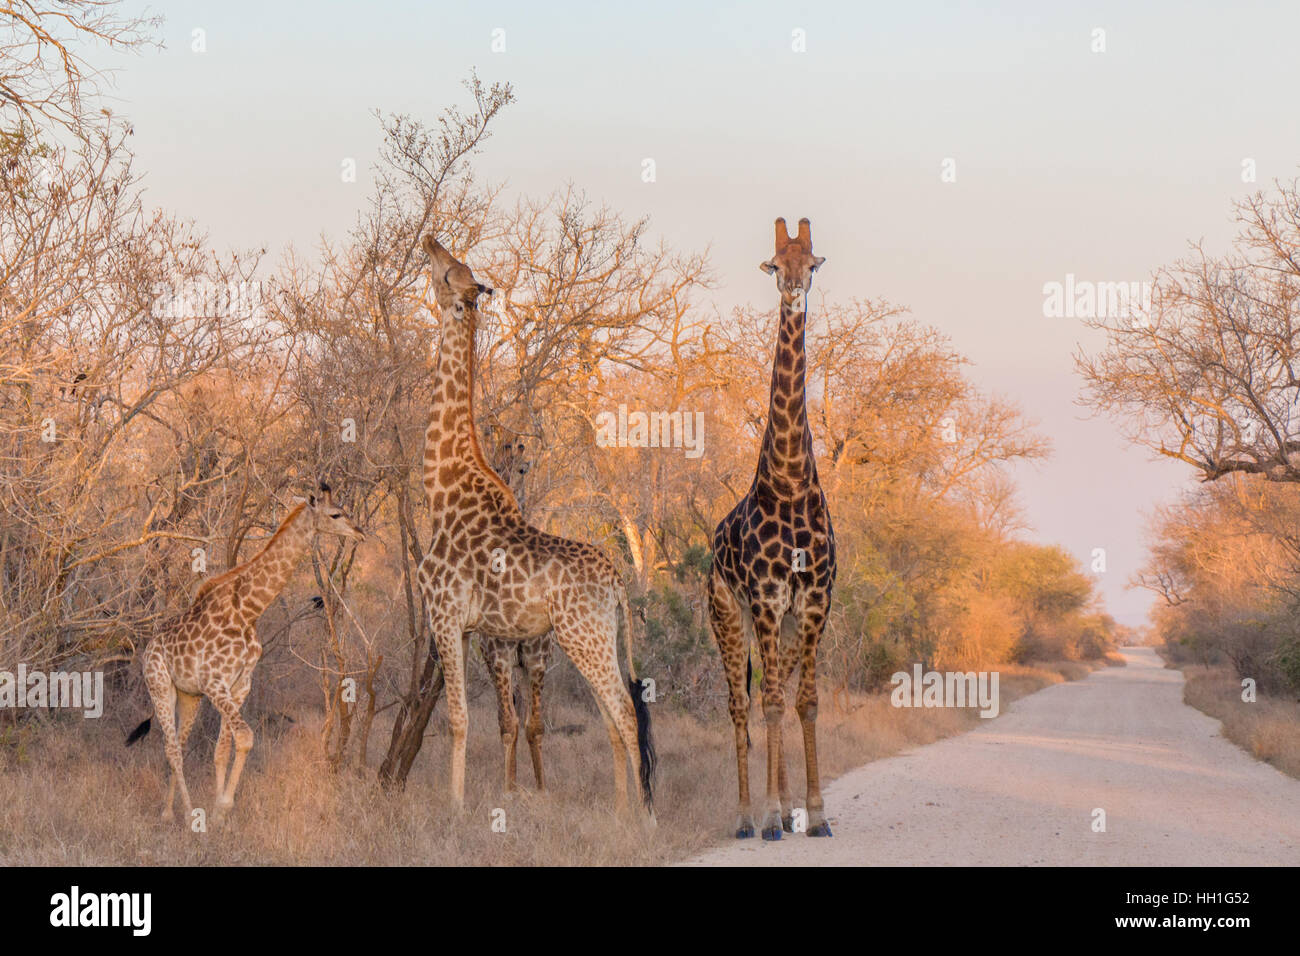 Three giraffes photographed in the late afternoon grazing on some trees in the Kruger National Park, South Africa. Stock Photo